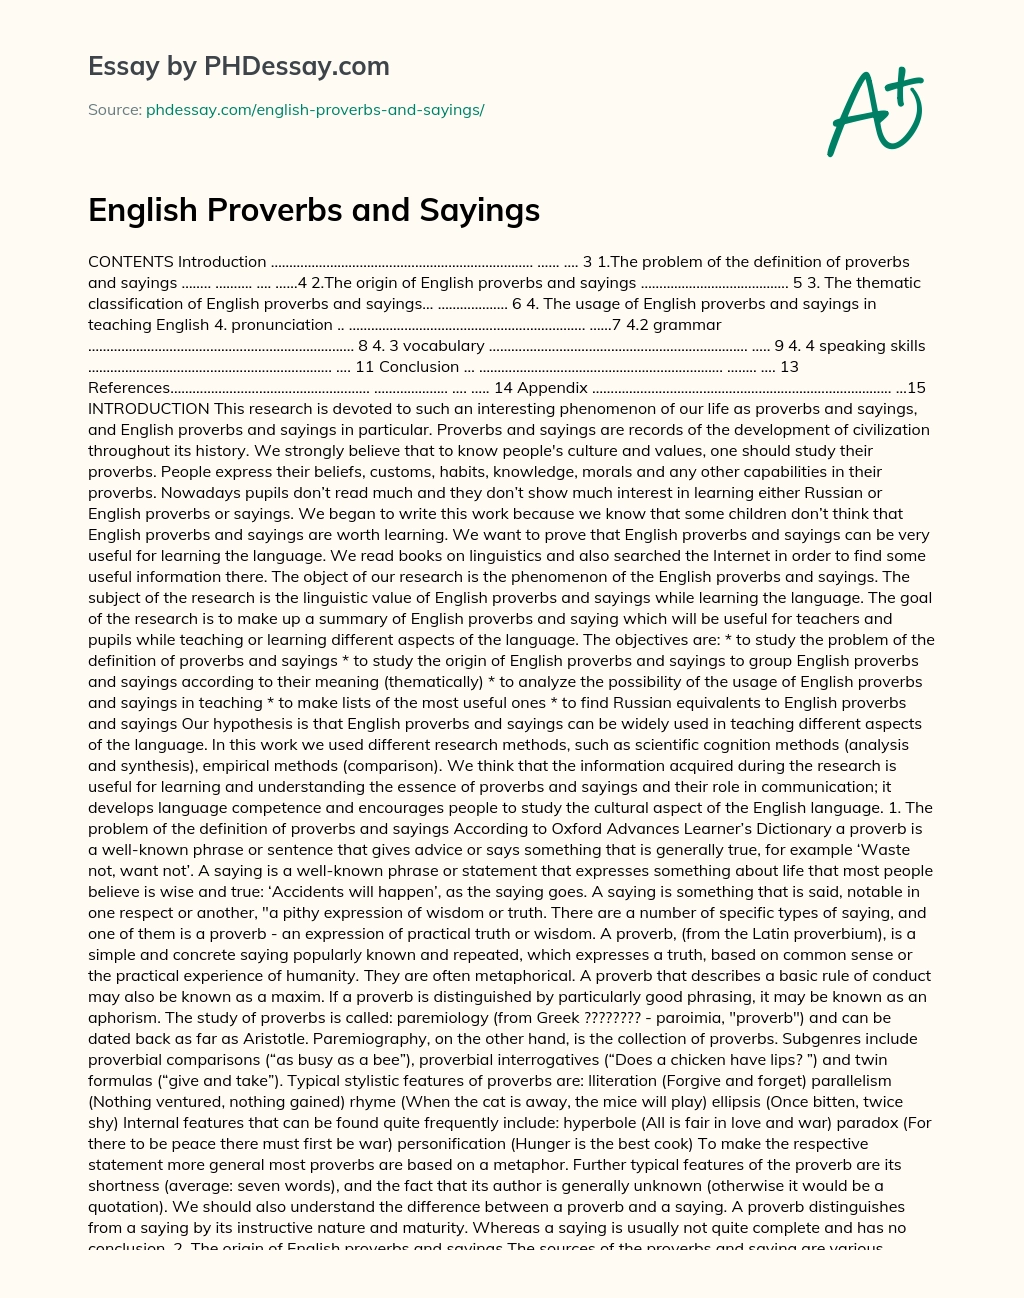 English Proverbs and Sayings essay